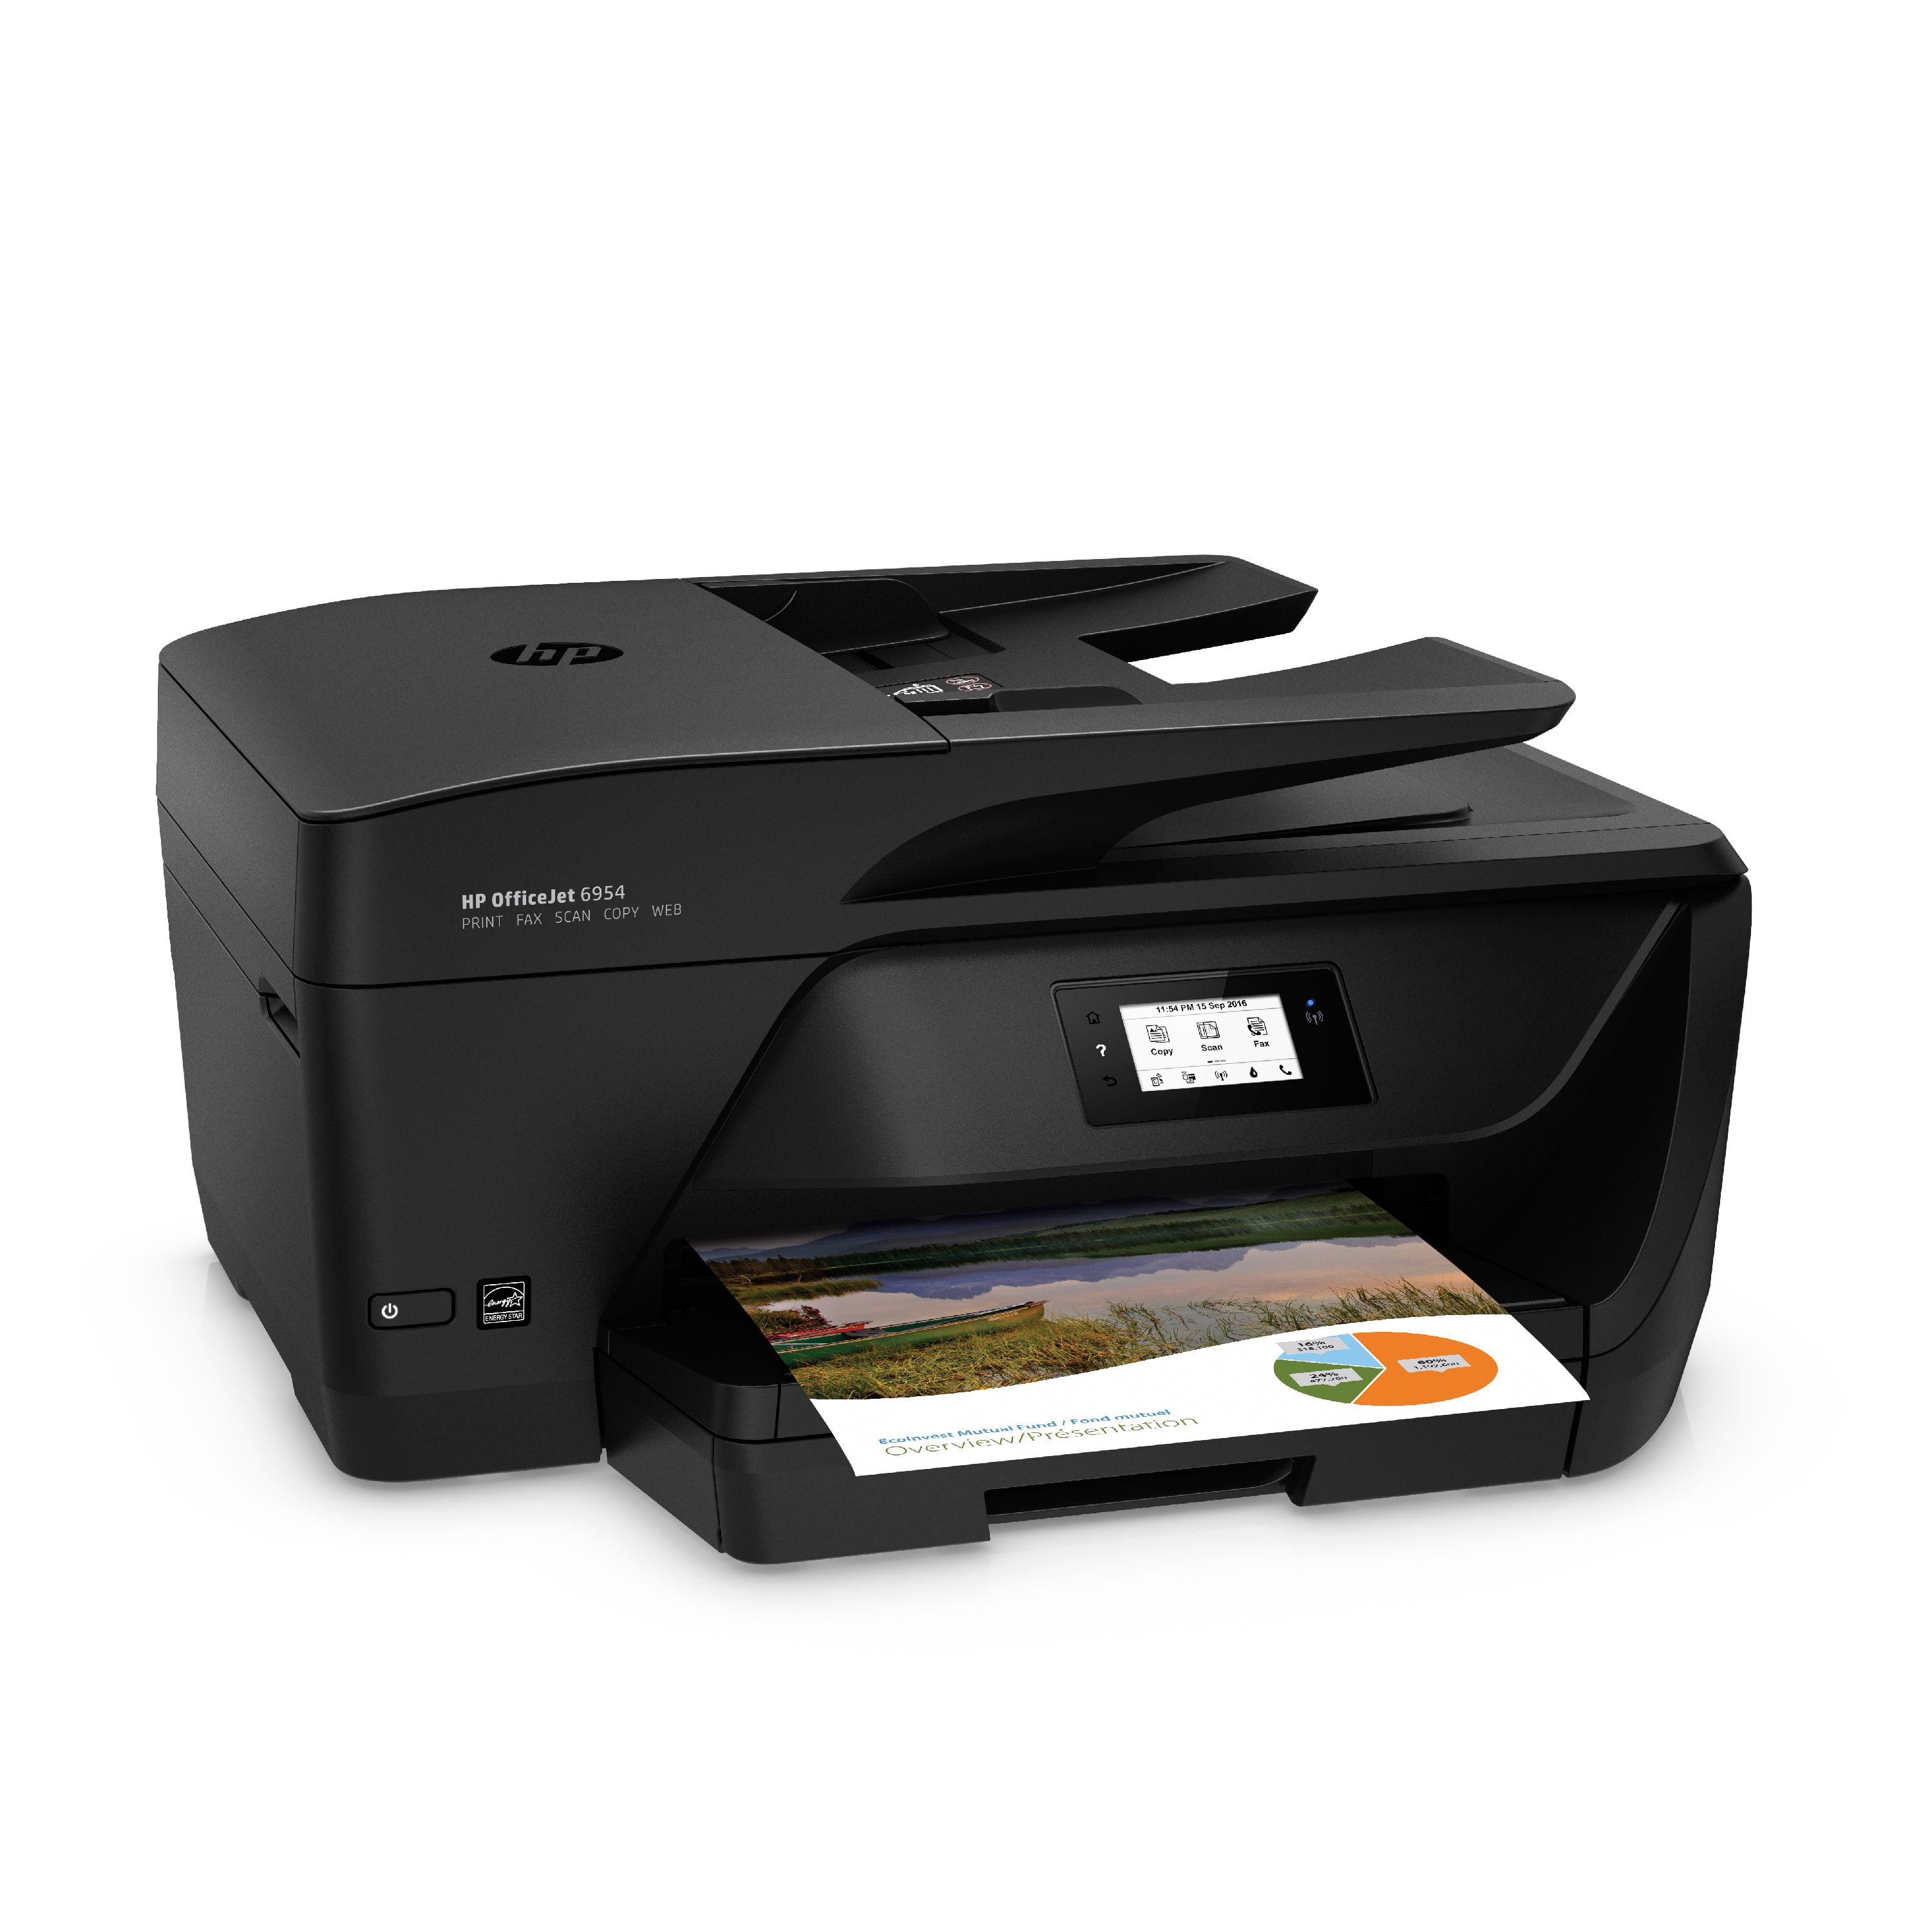 Office Outlet - The HP OfficeJet 6950 Printer delivers affordable,  professional quality documents that help you stand out. Only £74.99!